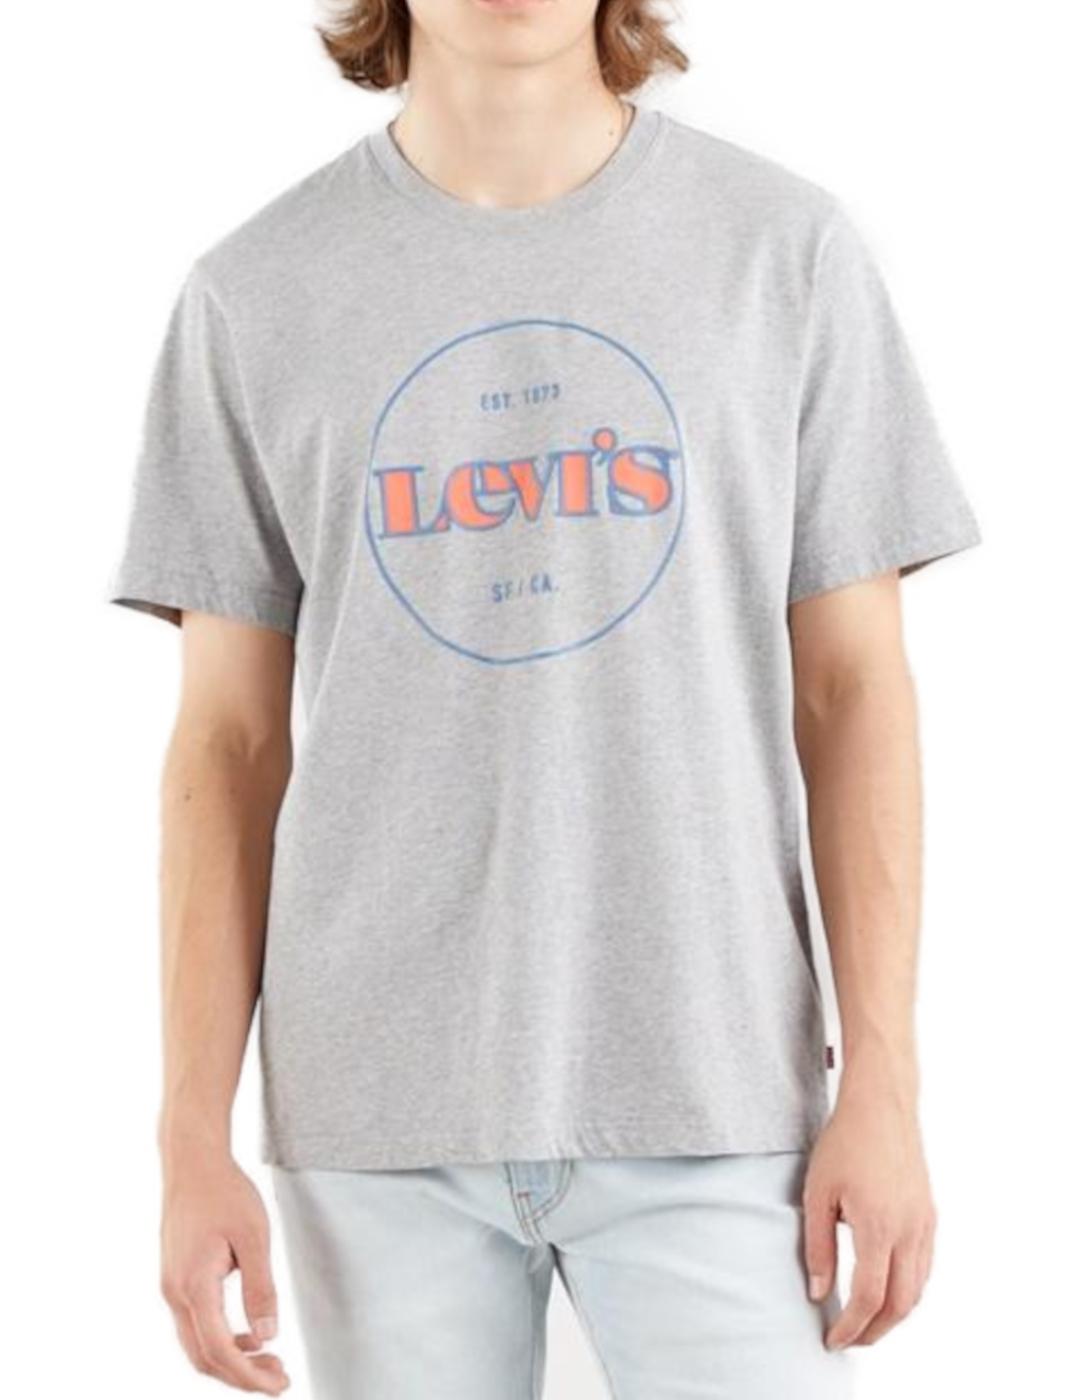 Camiseta levi´s relaxed fit tee ssnl gris manga corta hombre